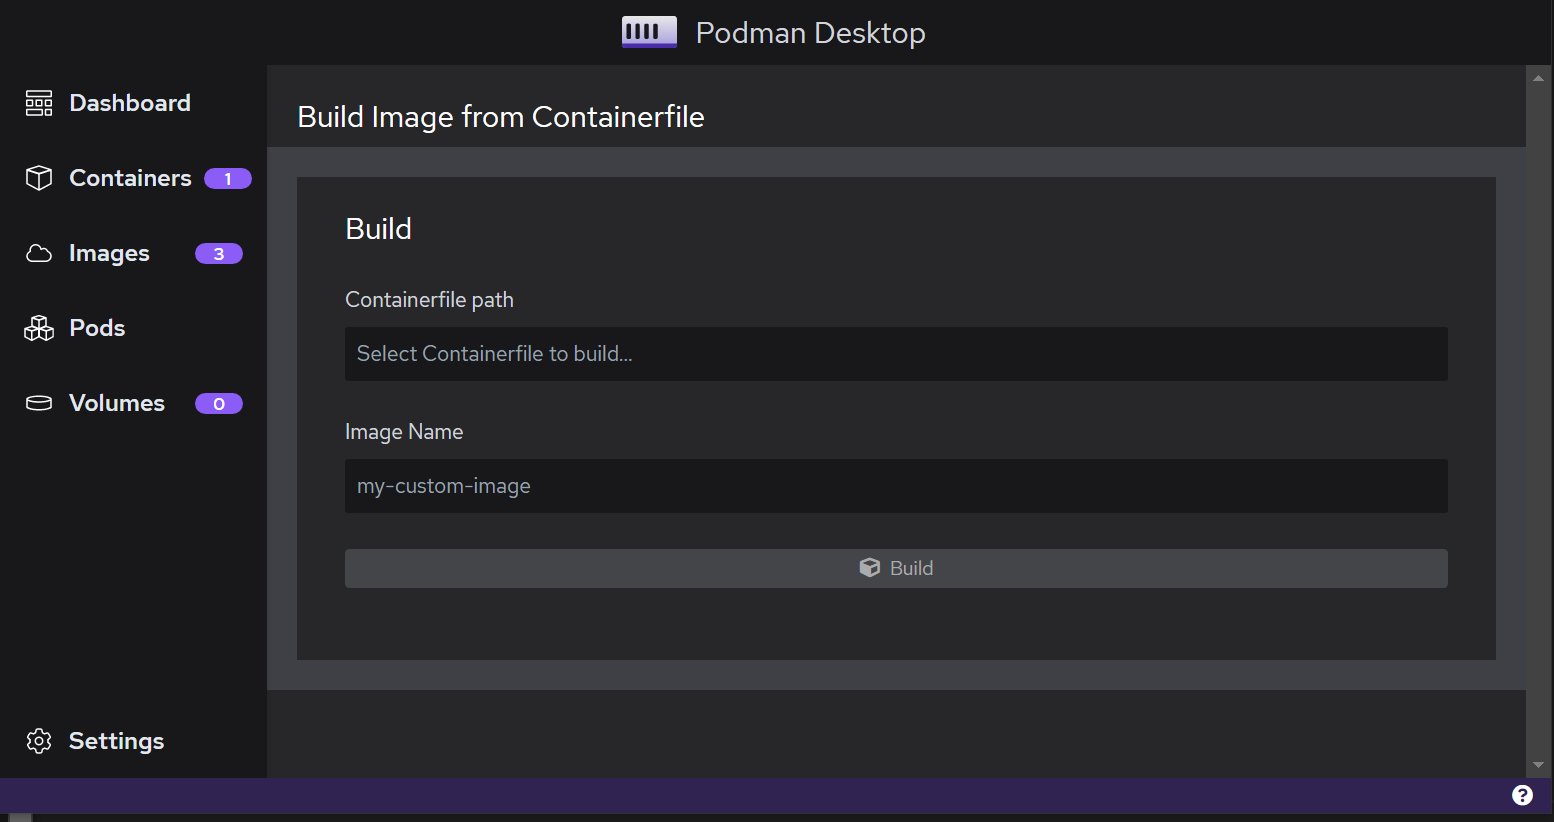 Podman Desktop dialog "Build image from Containerfile"